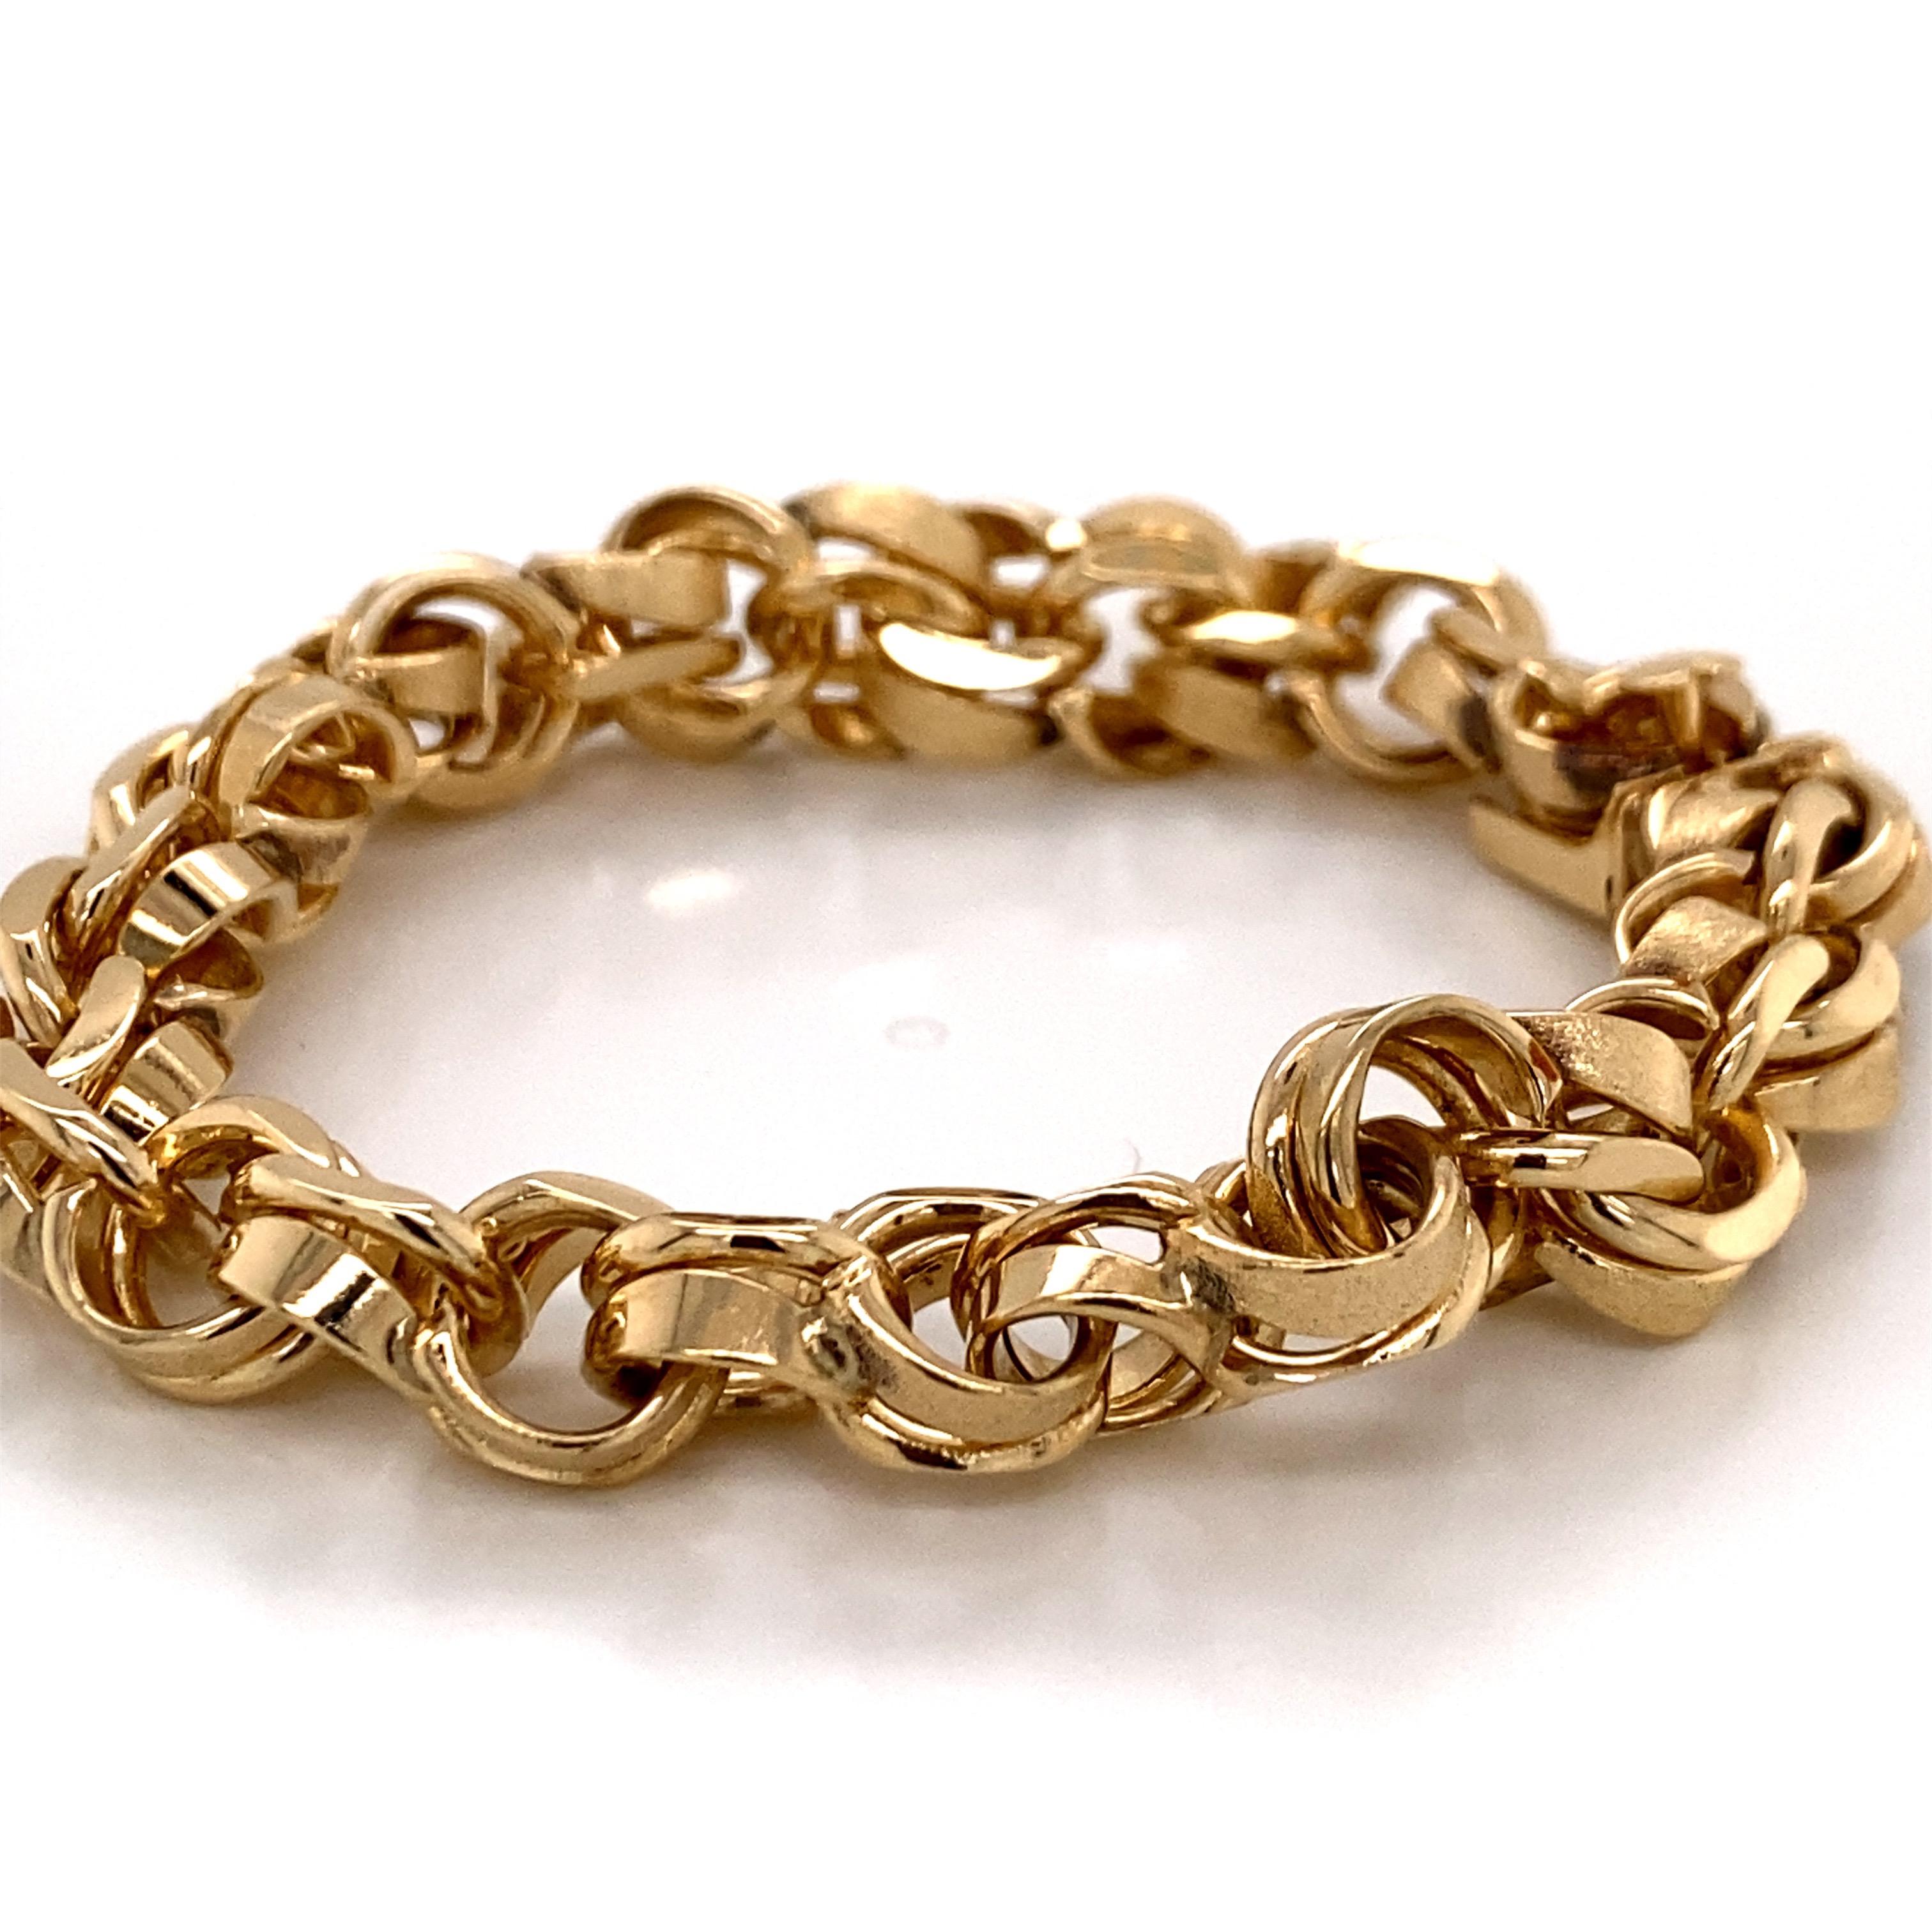 Vintage 1990's 14K Yellow Gold Heavy Charm Bracelet - The bracelet measure 7 1/4 inches long and 3/8 inches wide. It features a hidden barrel clasp with a figure 8 safety. The bracelet weighs 43.8 grams.